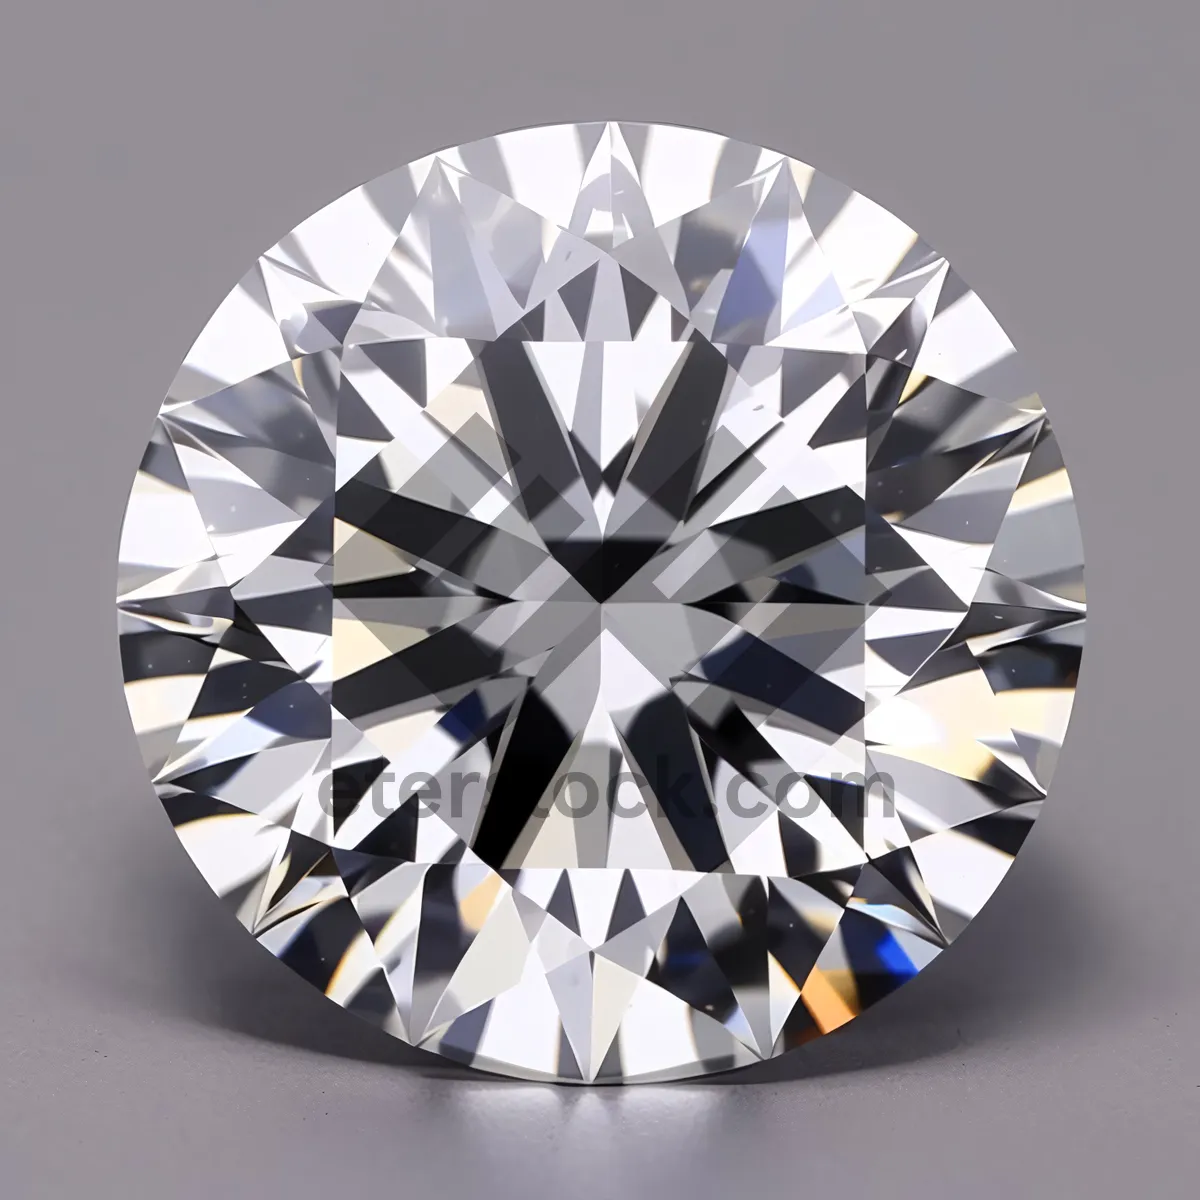 Picture of Shimmering Brilliance: Exquisite Diamond Jewel in Transparent Glass